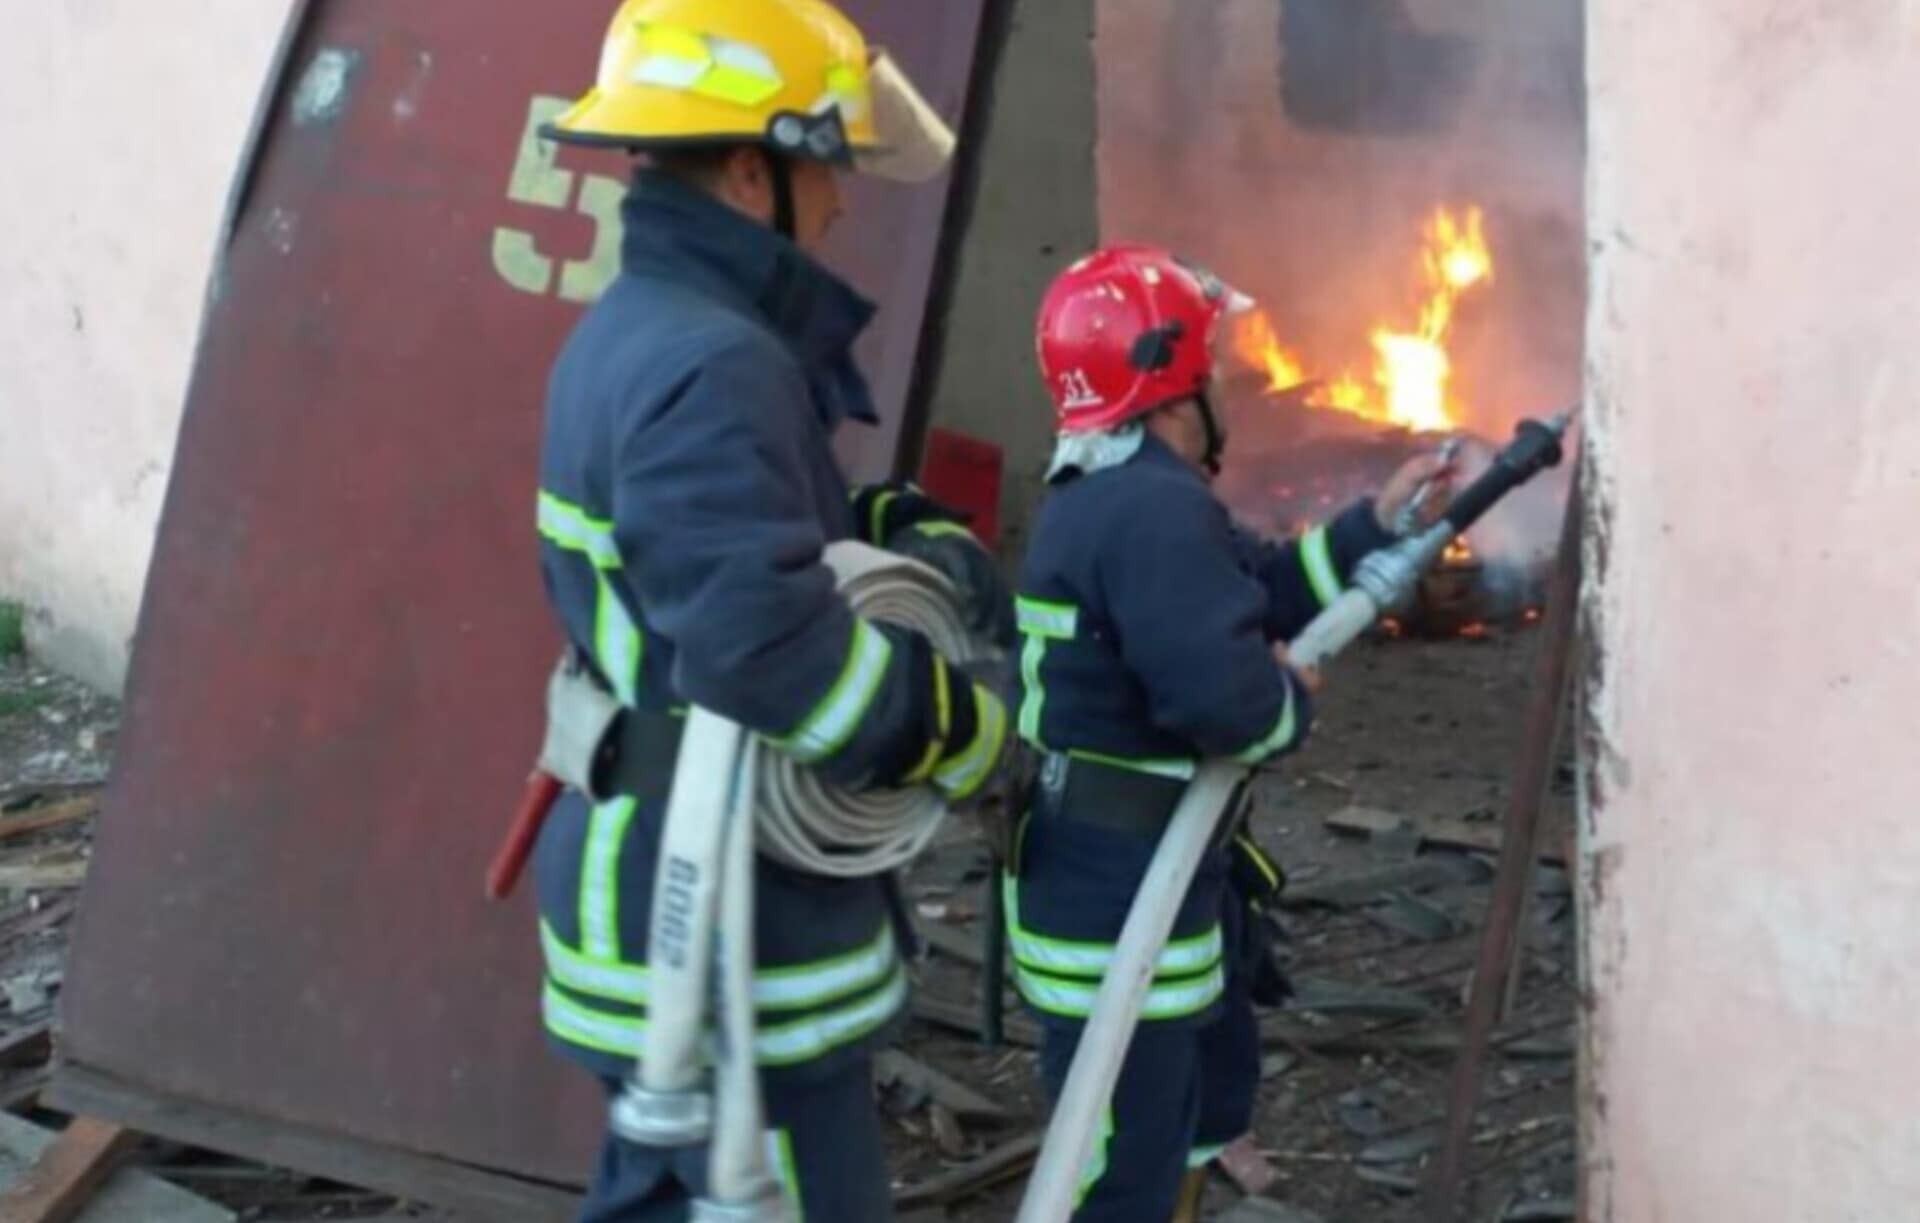 The occupants at night attacked the port infrastructure of the Danube in Odessa region: a hangar with grain was destroyed, there are victims. Photo